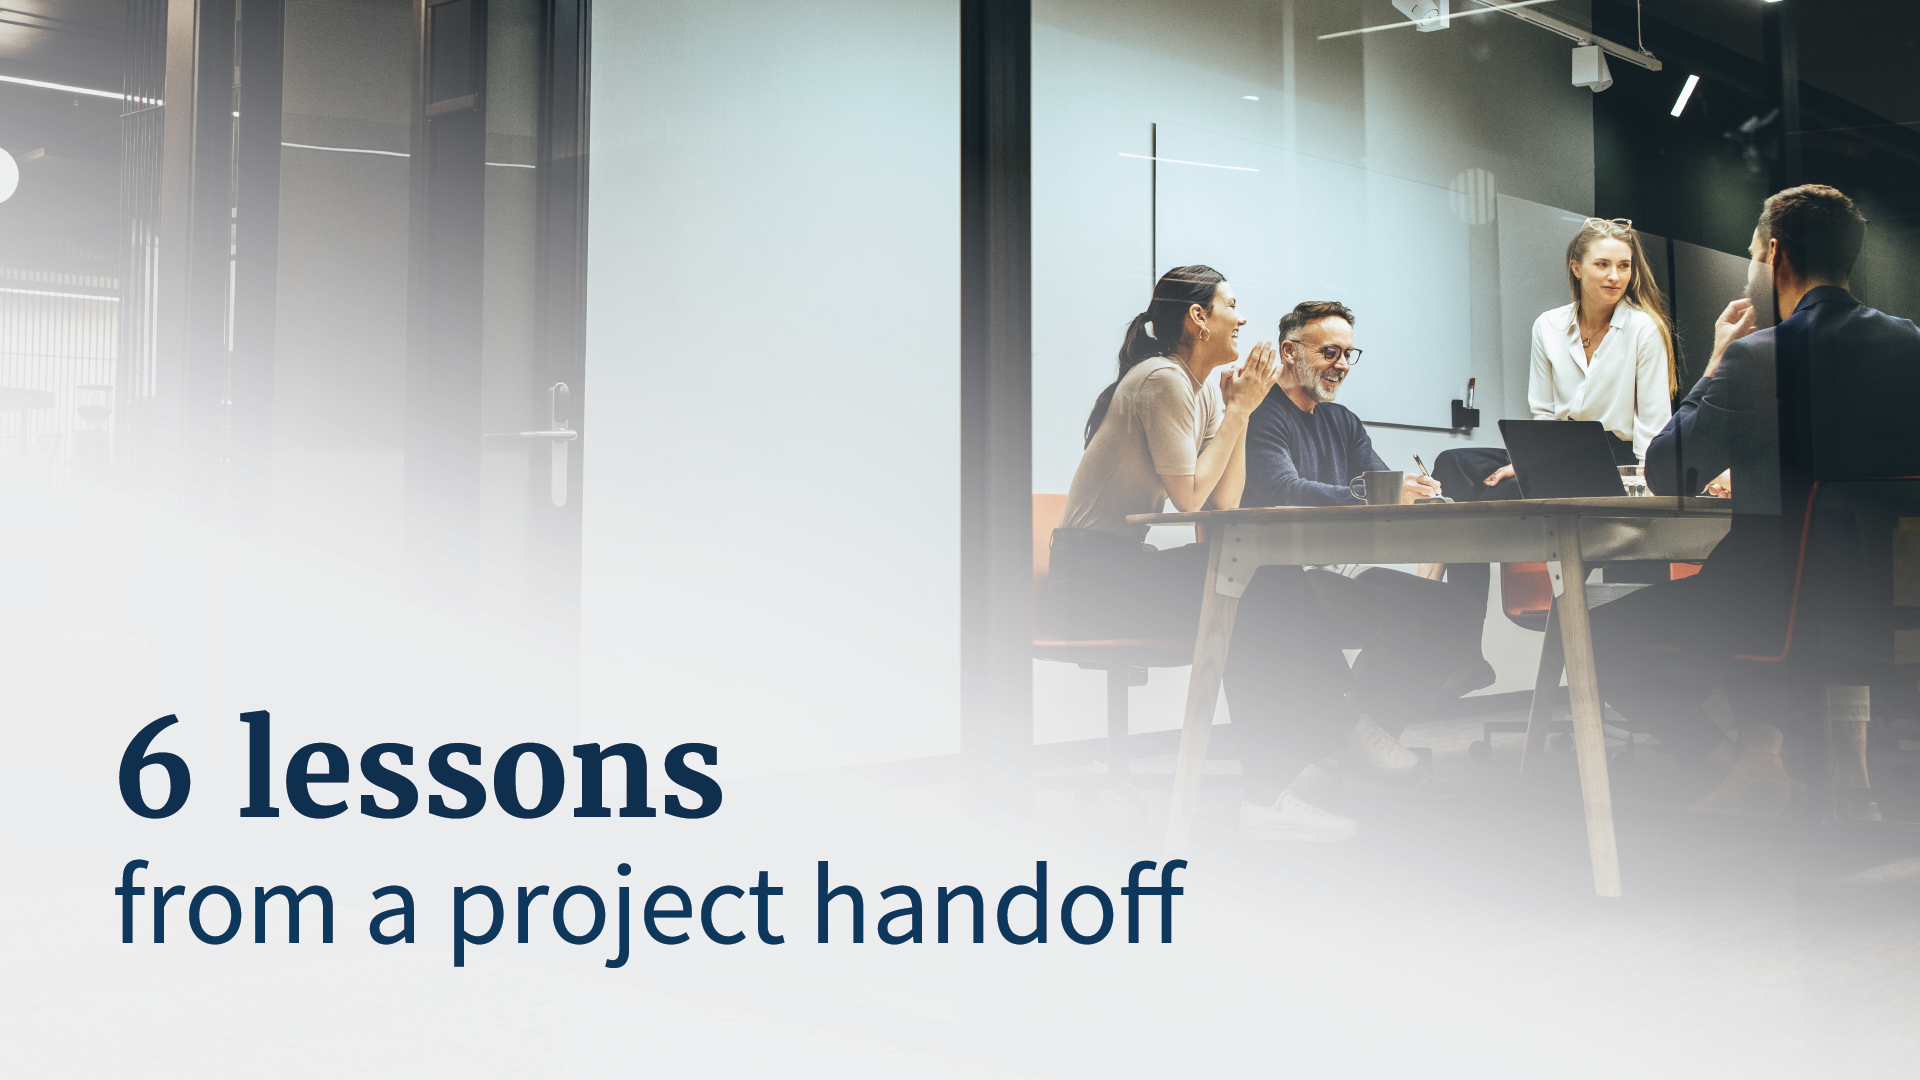 6 lessons from a project handoff